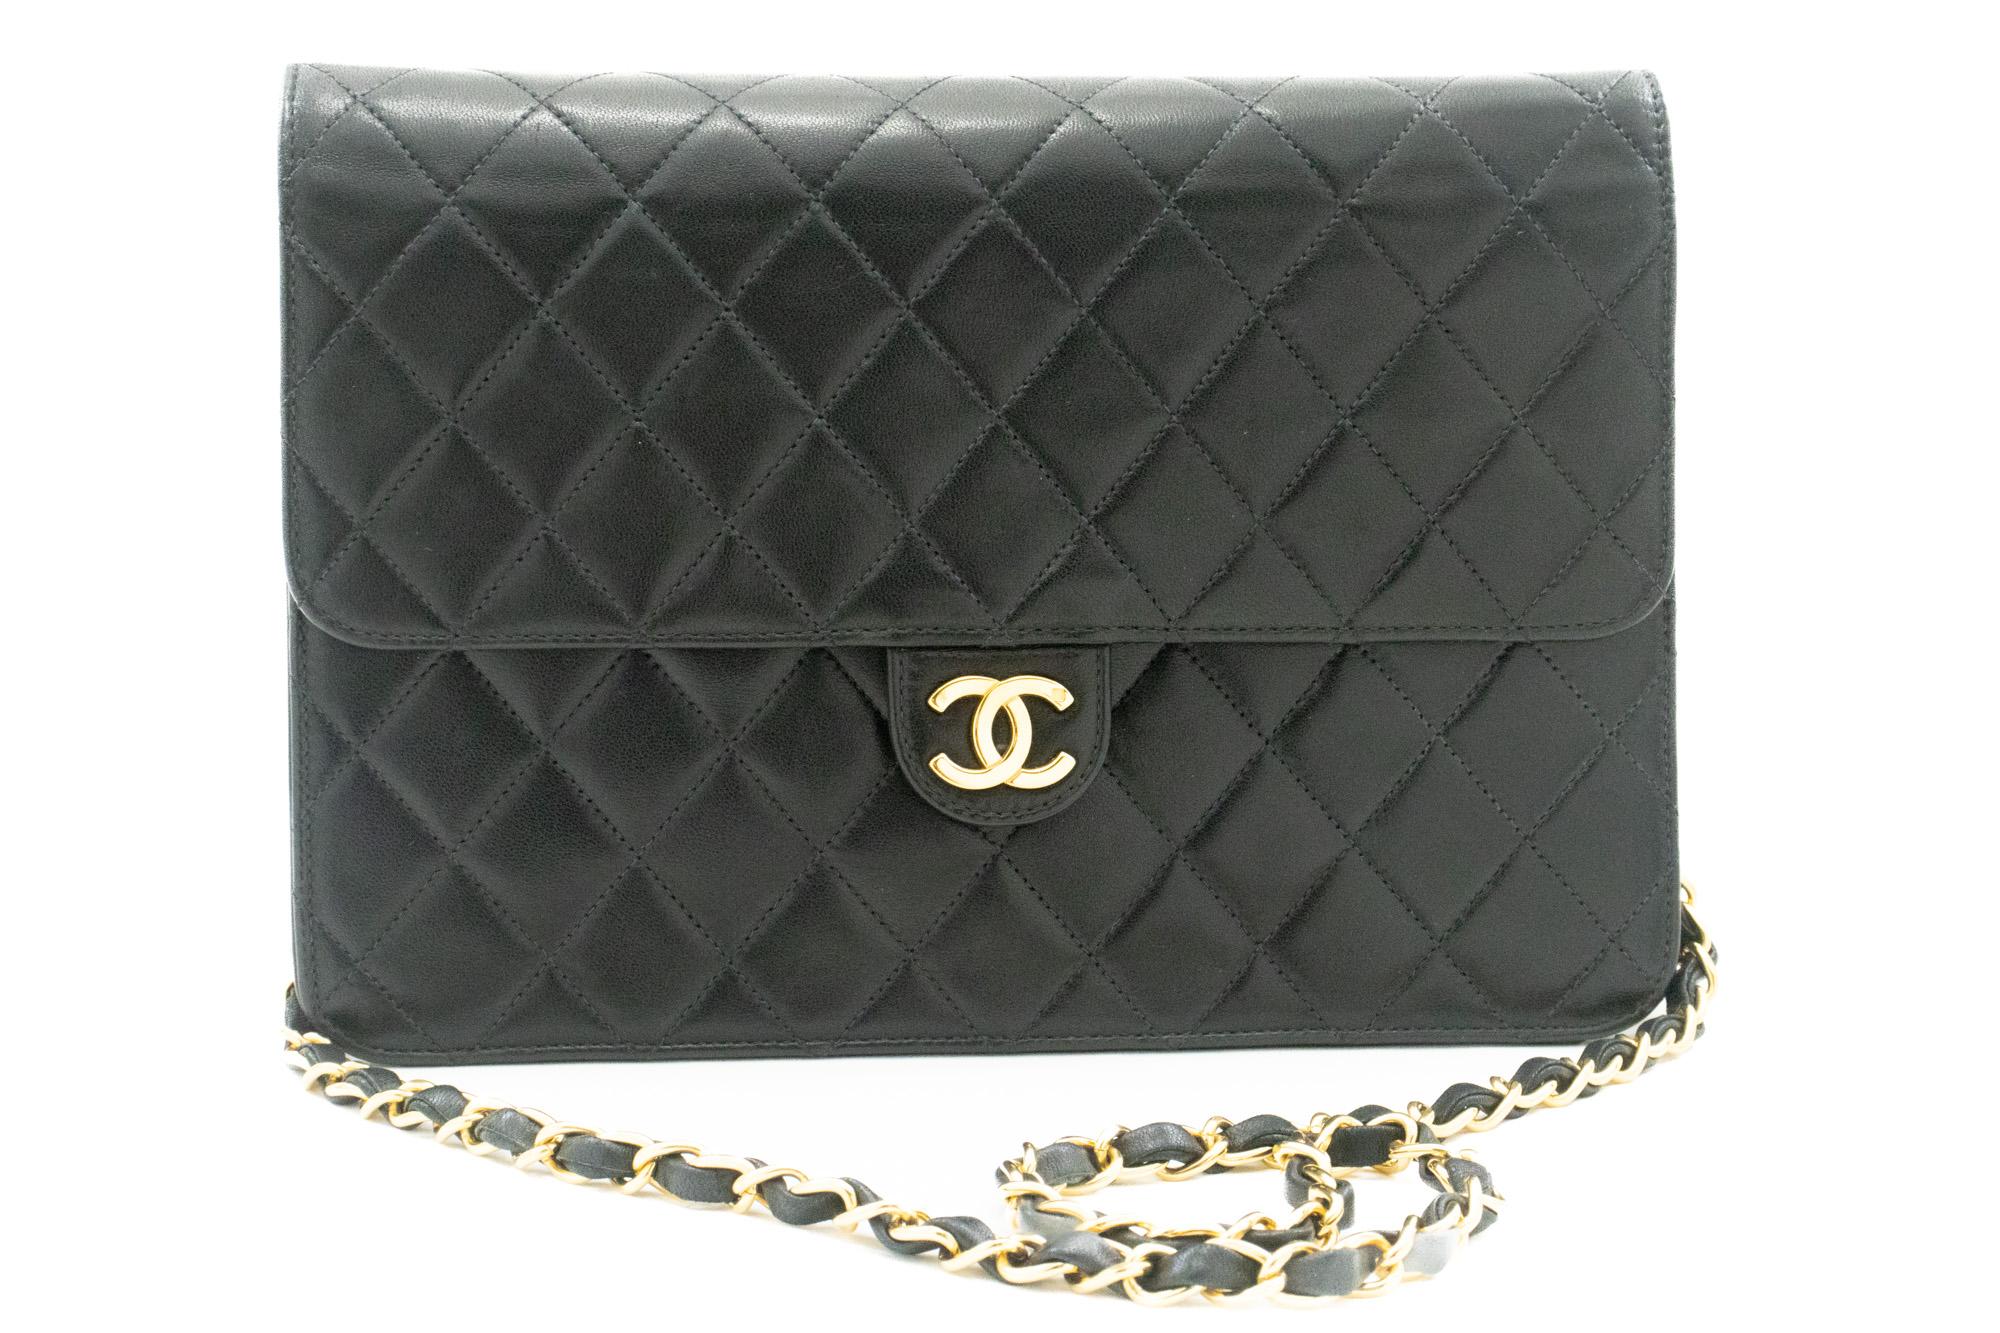 An authentic CHANEL Chain Shoulder Bag Clutch Black Quilted Flap made of black Lambskin Purse. The color is Black. The outside material is Leather. The pattern is Solid. This item is Vintage / Classic. The year of manufacture would be 2000-2 0 0 2